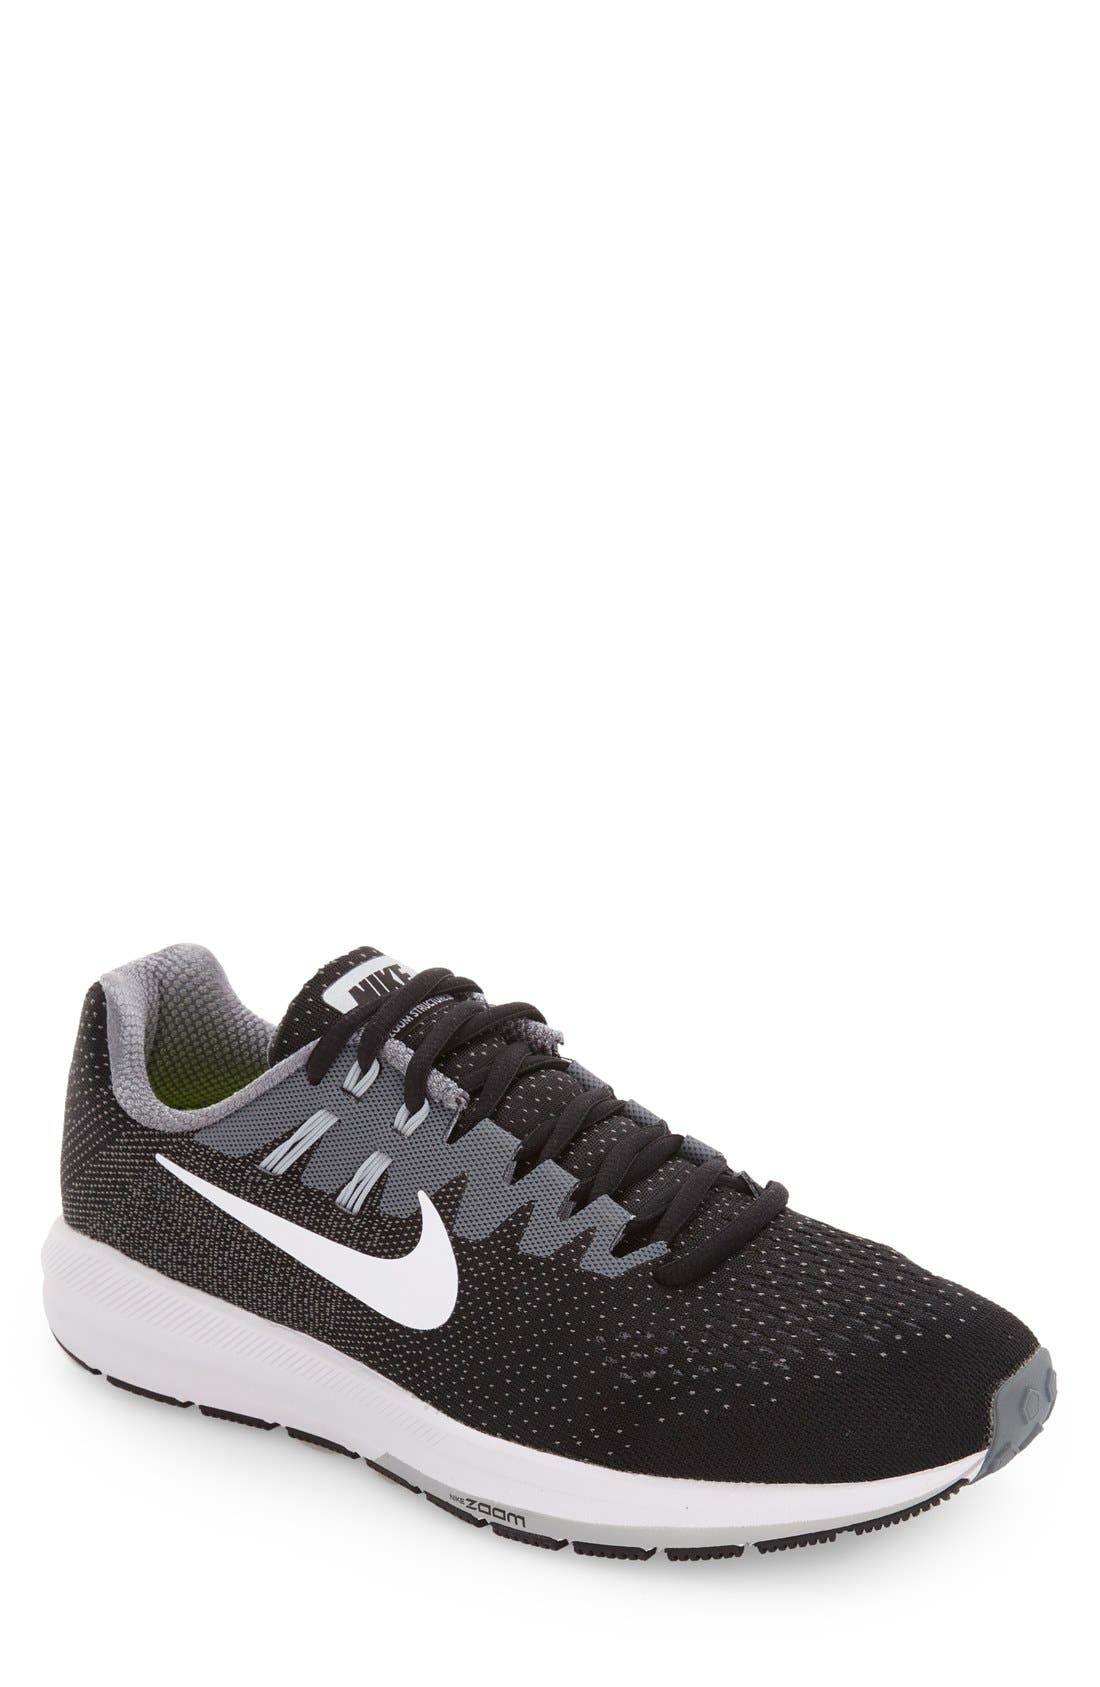 nike air zoom structure 20 men's